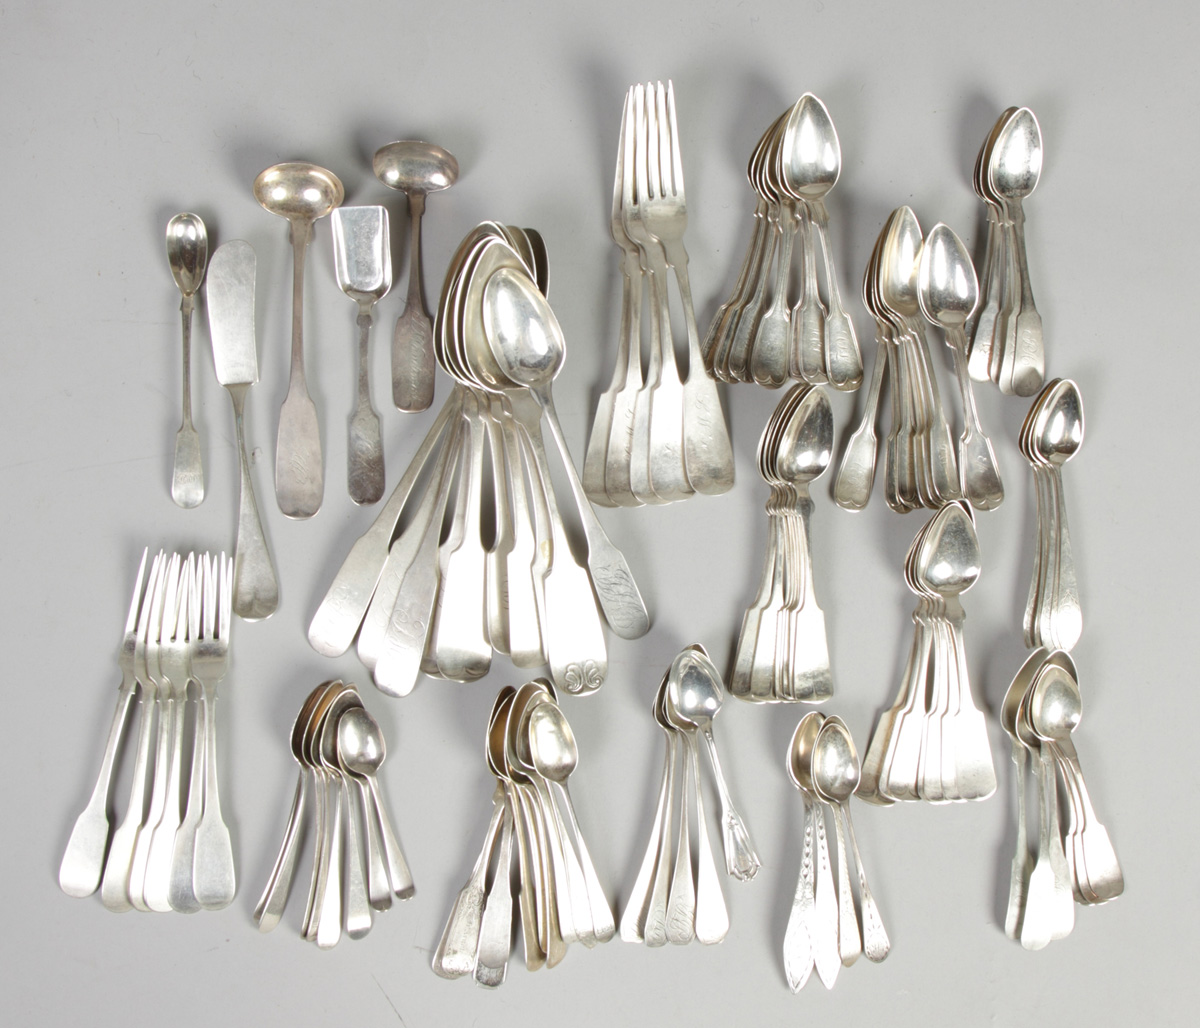 Misc. Coin forks serving spoons teaspoons